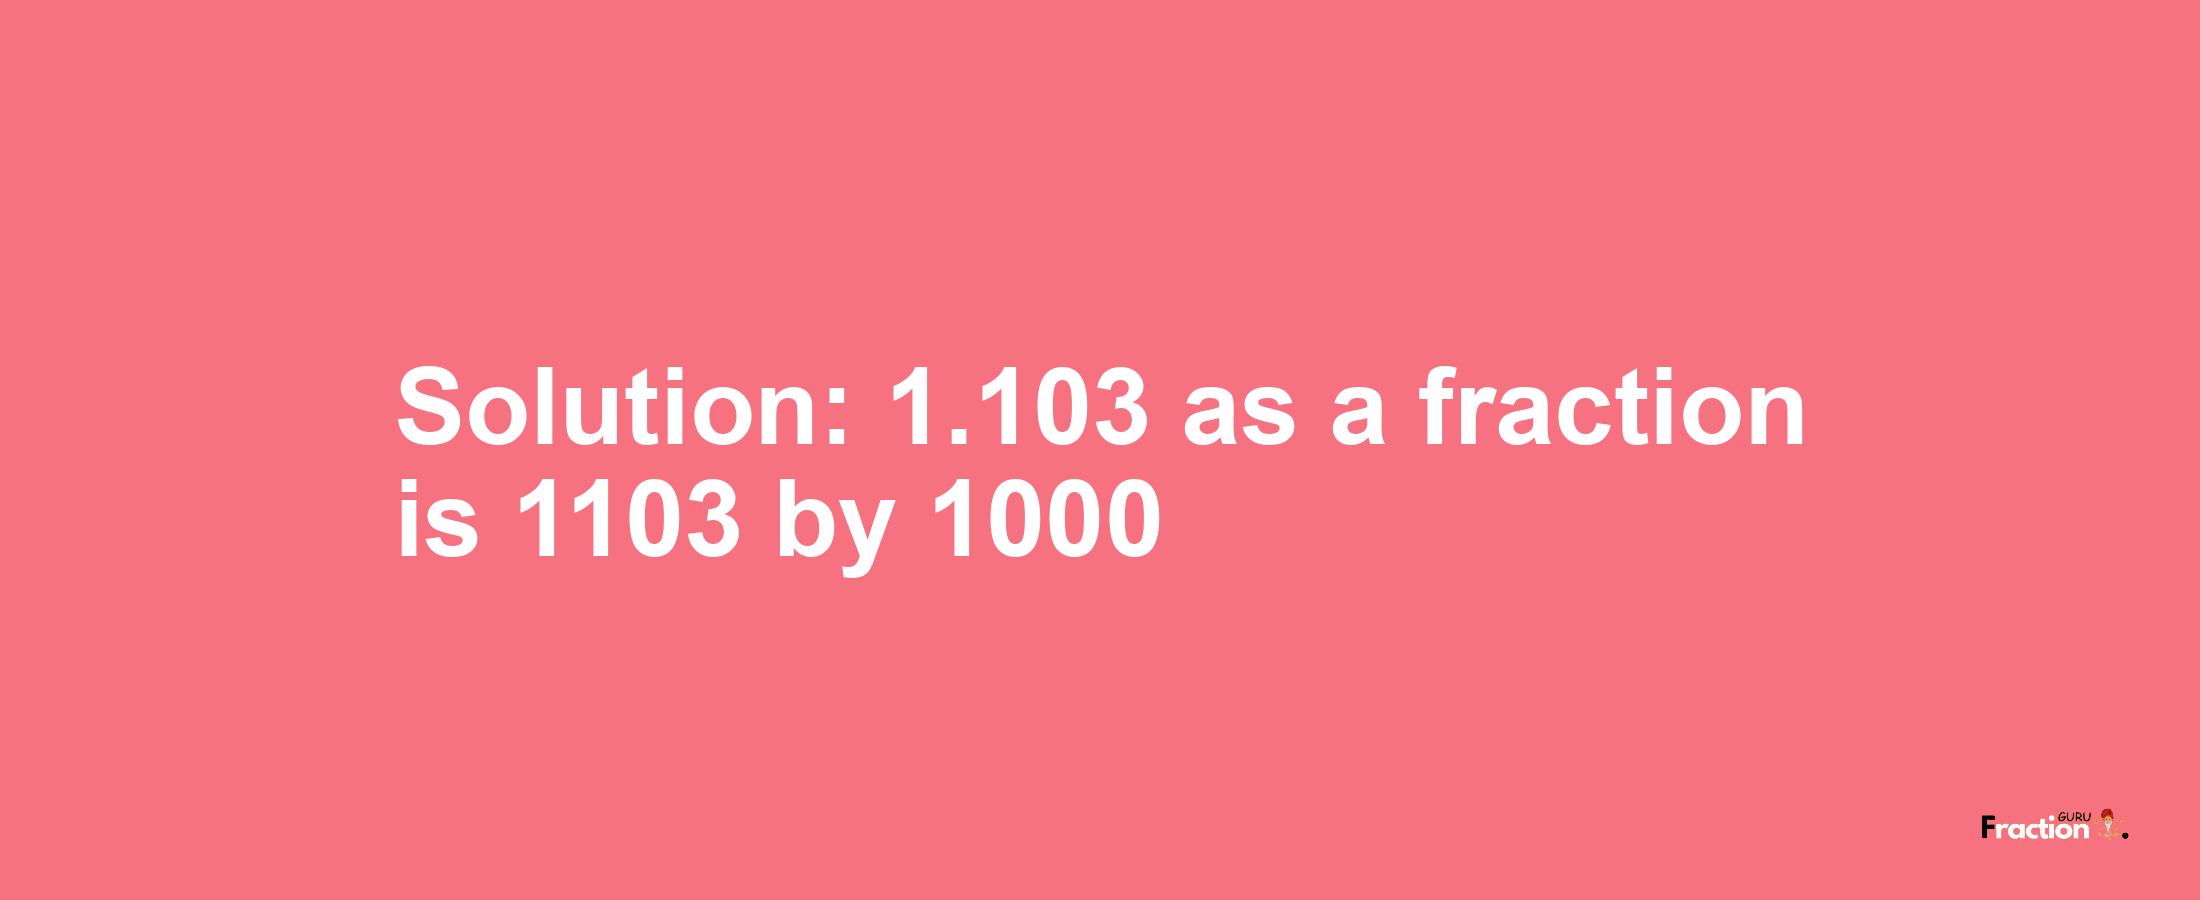 Solution:1.103 as a fraction is 1103/1000